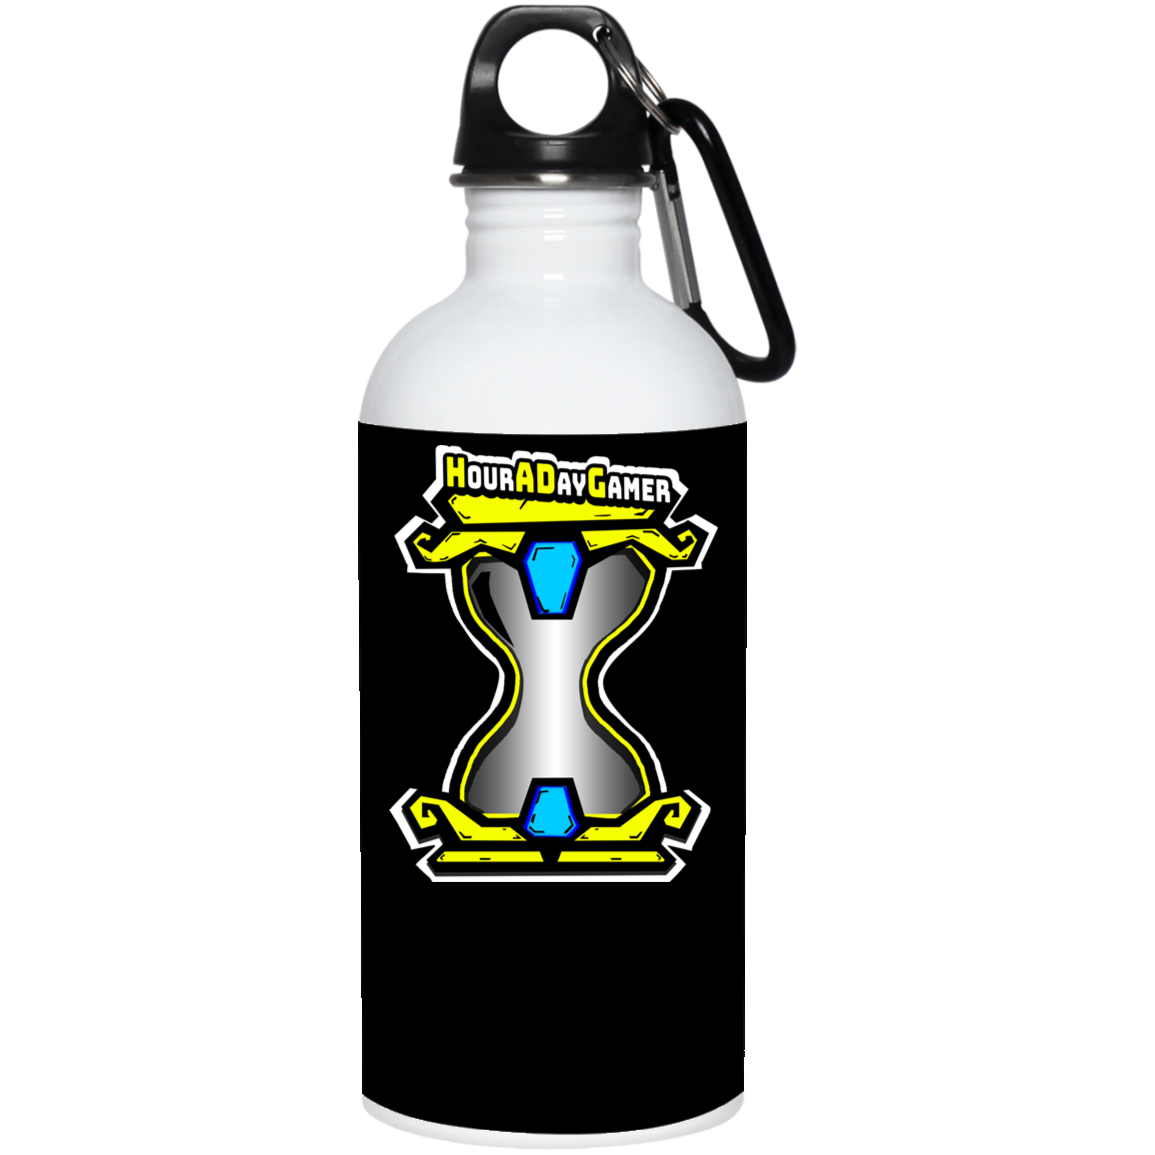 s-had STAINLESS STEEL WATER BOTTLE